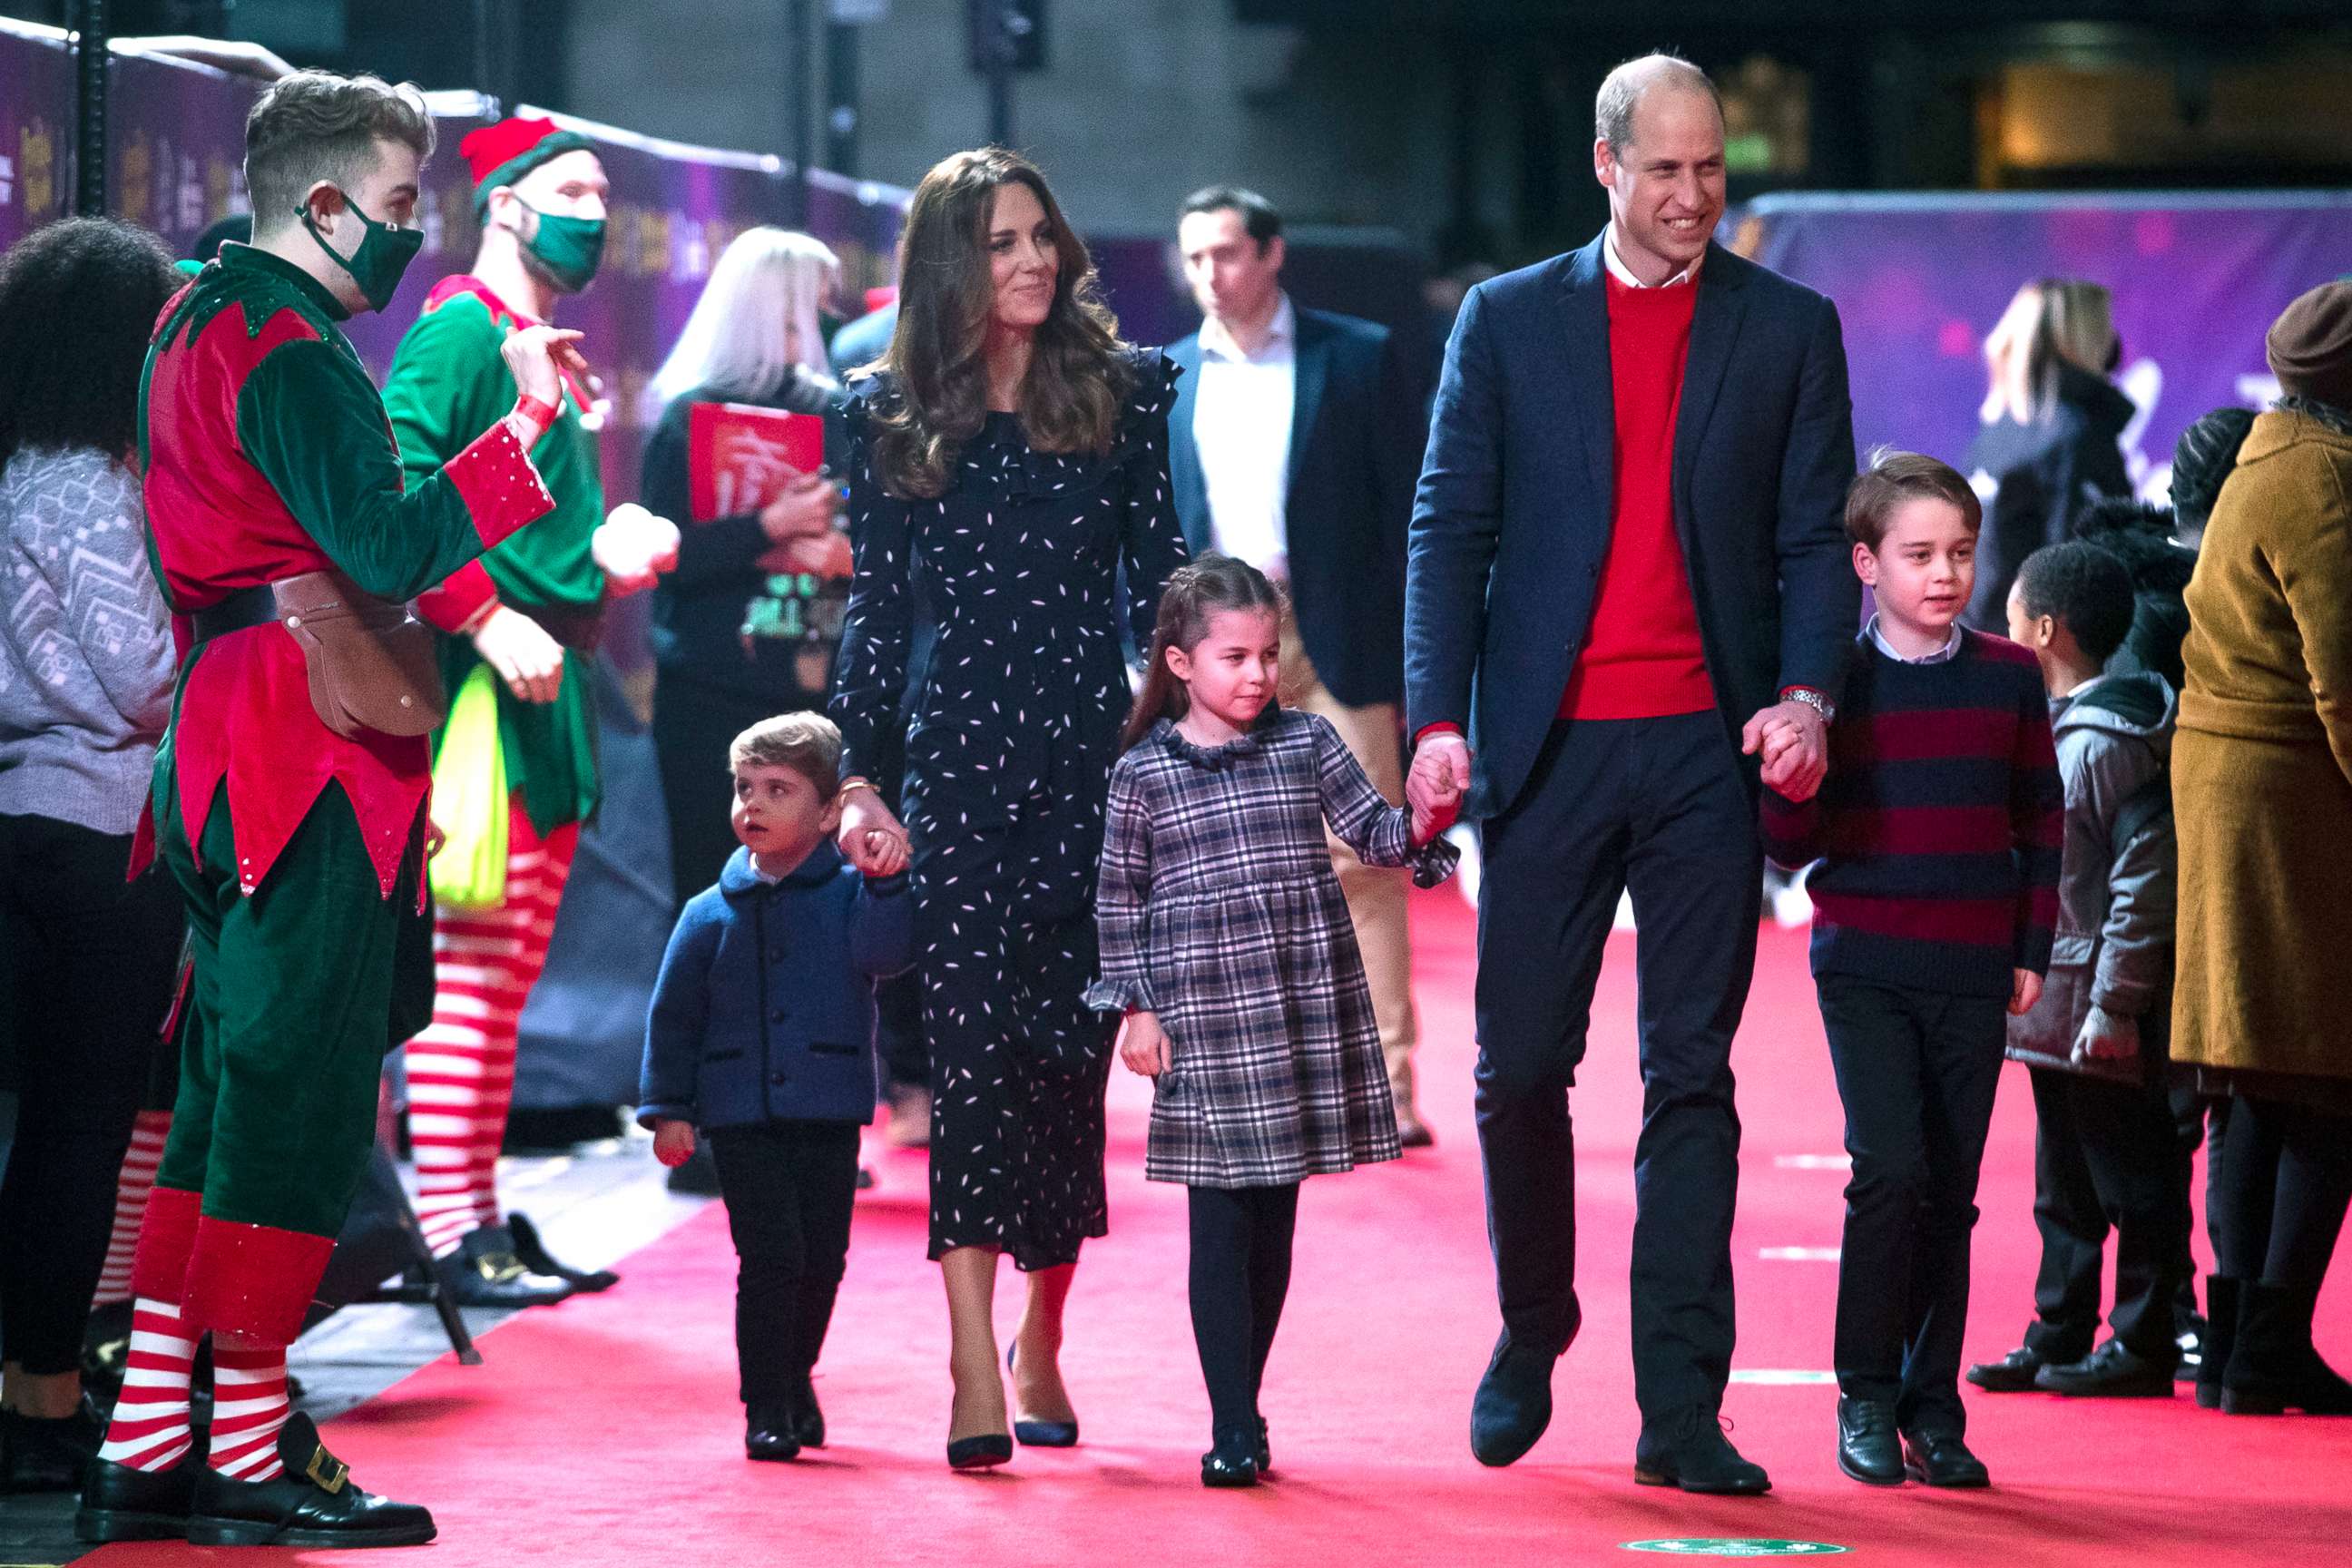 PHOTO: Prince William, Duke of Cambridge and Catherine, Duchess of Cambridge with their children, Prince Louis, Princess Charlotte and Prince George, attend a special pantomime performance at London's Palladium Theatre, Dec. 11, 2020, in London.